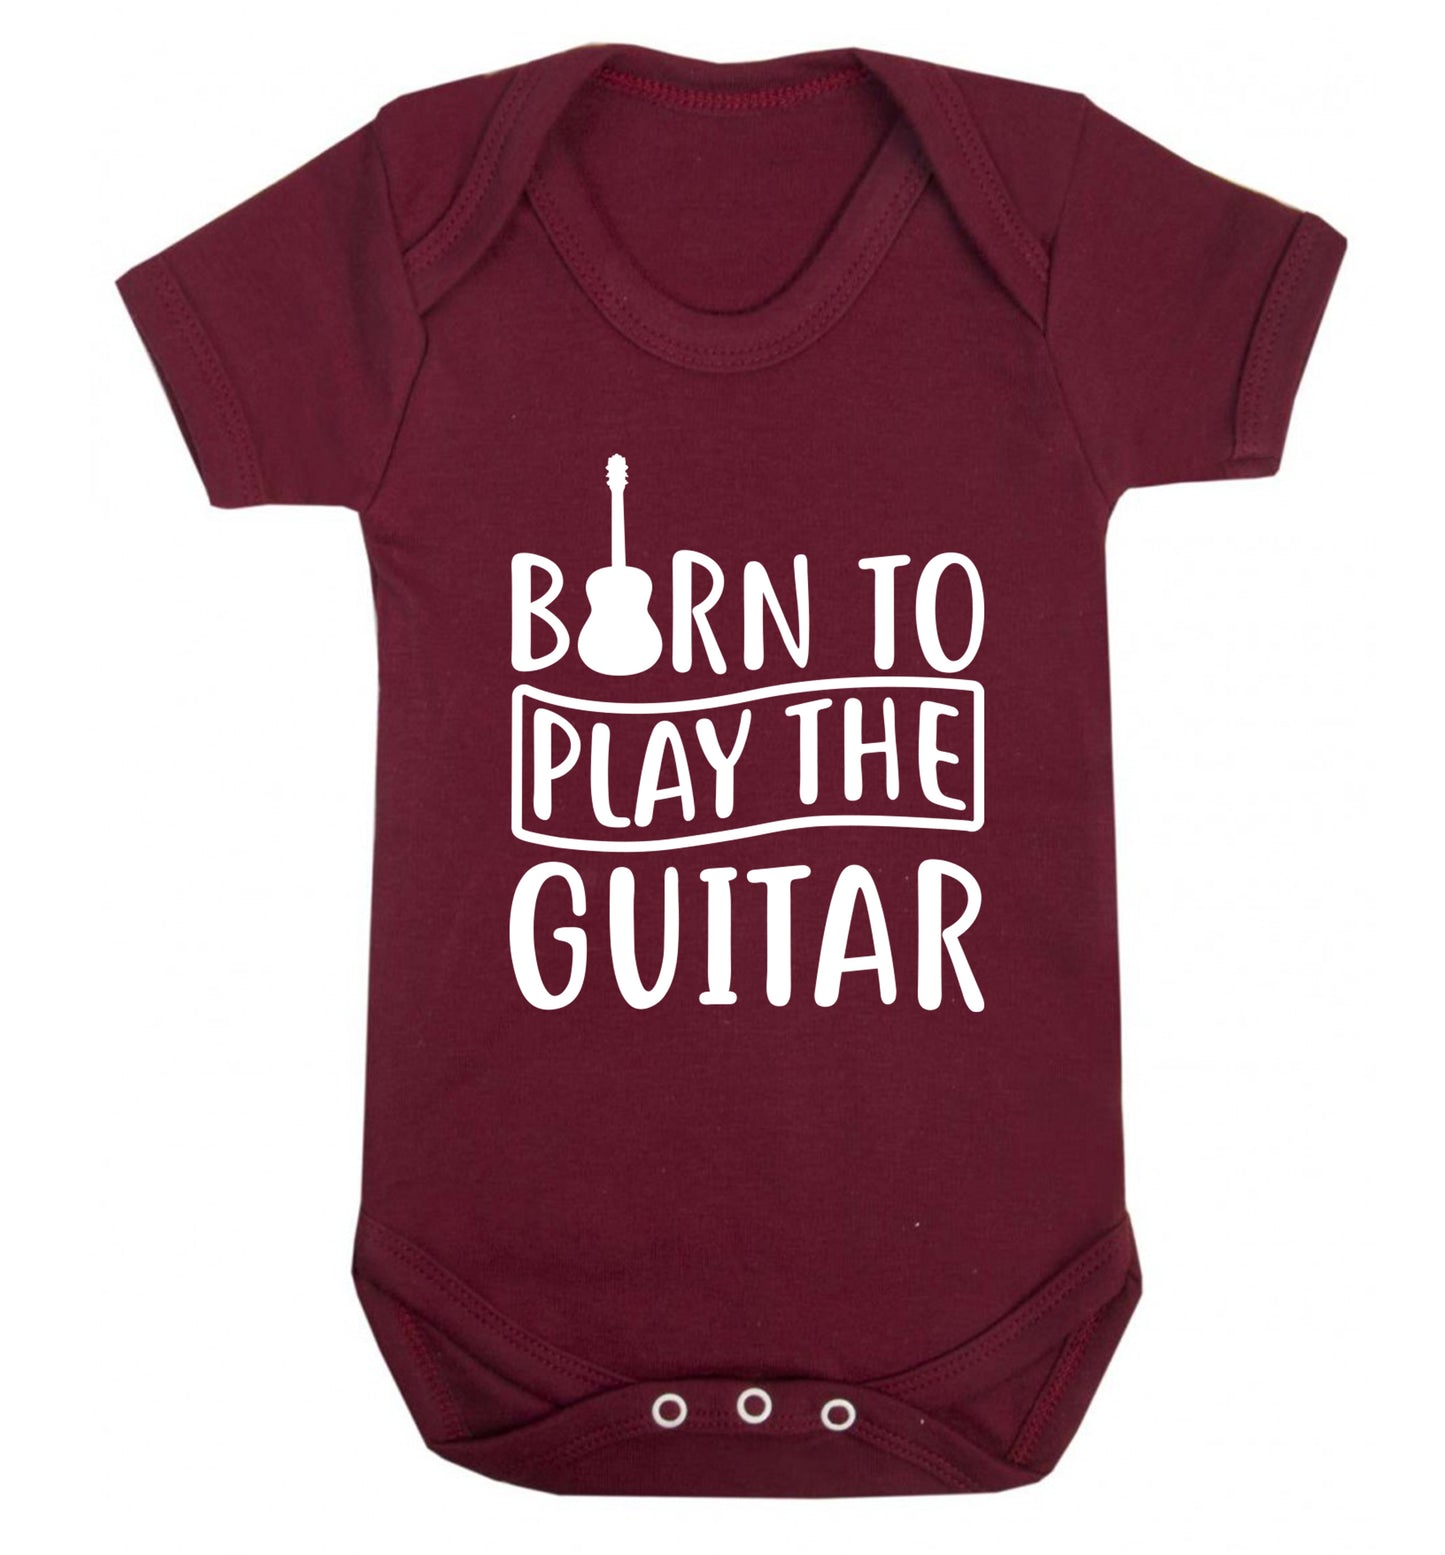 Born to play the guitar Baby Vest maroon 18-24 months